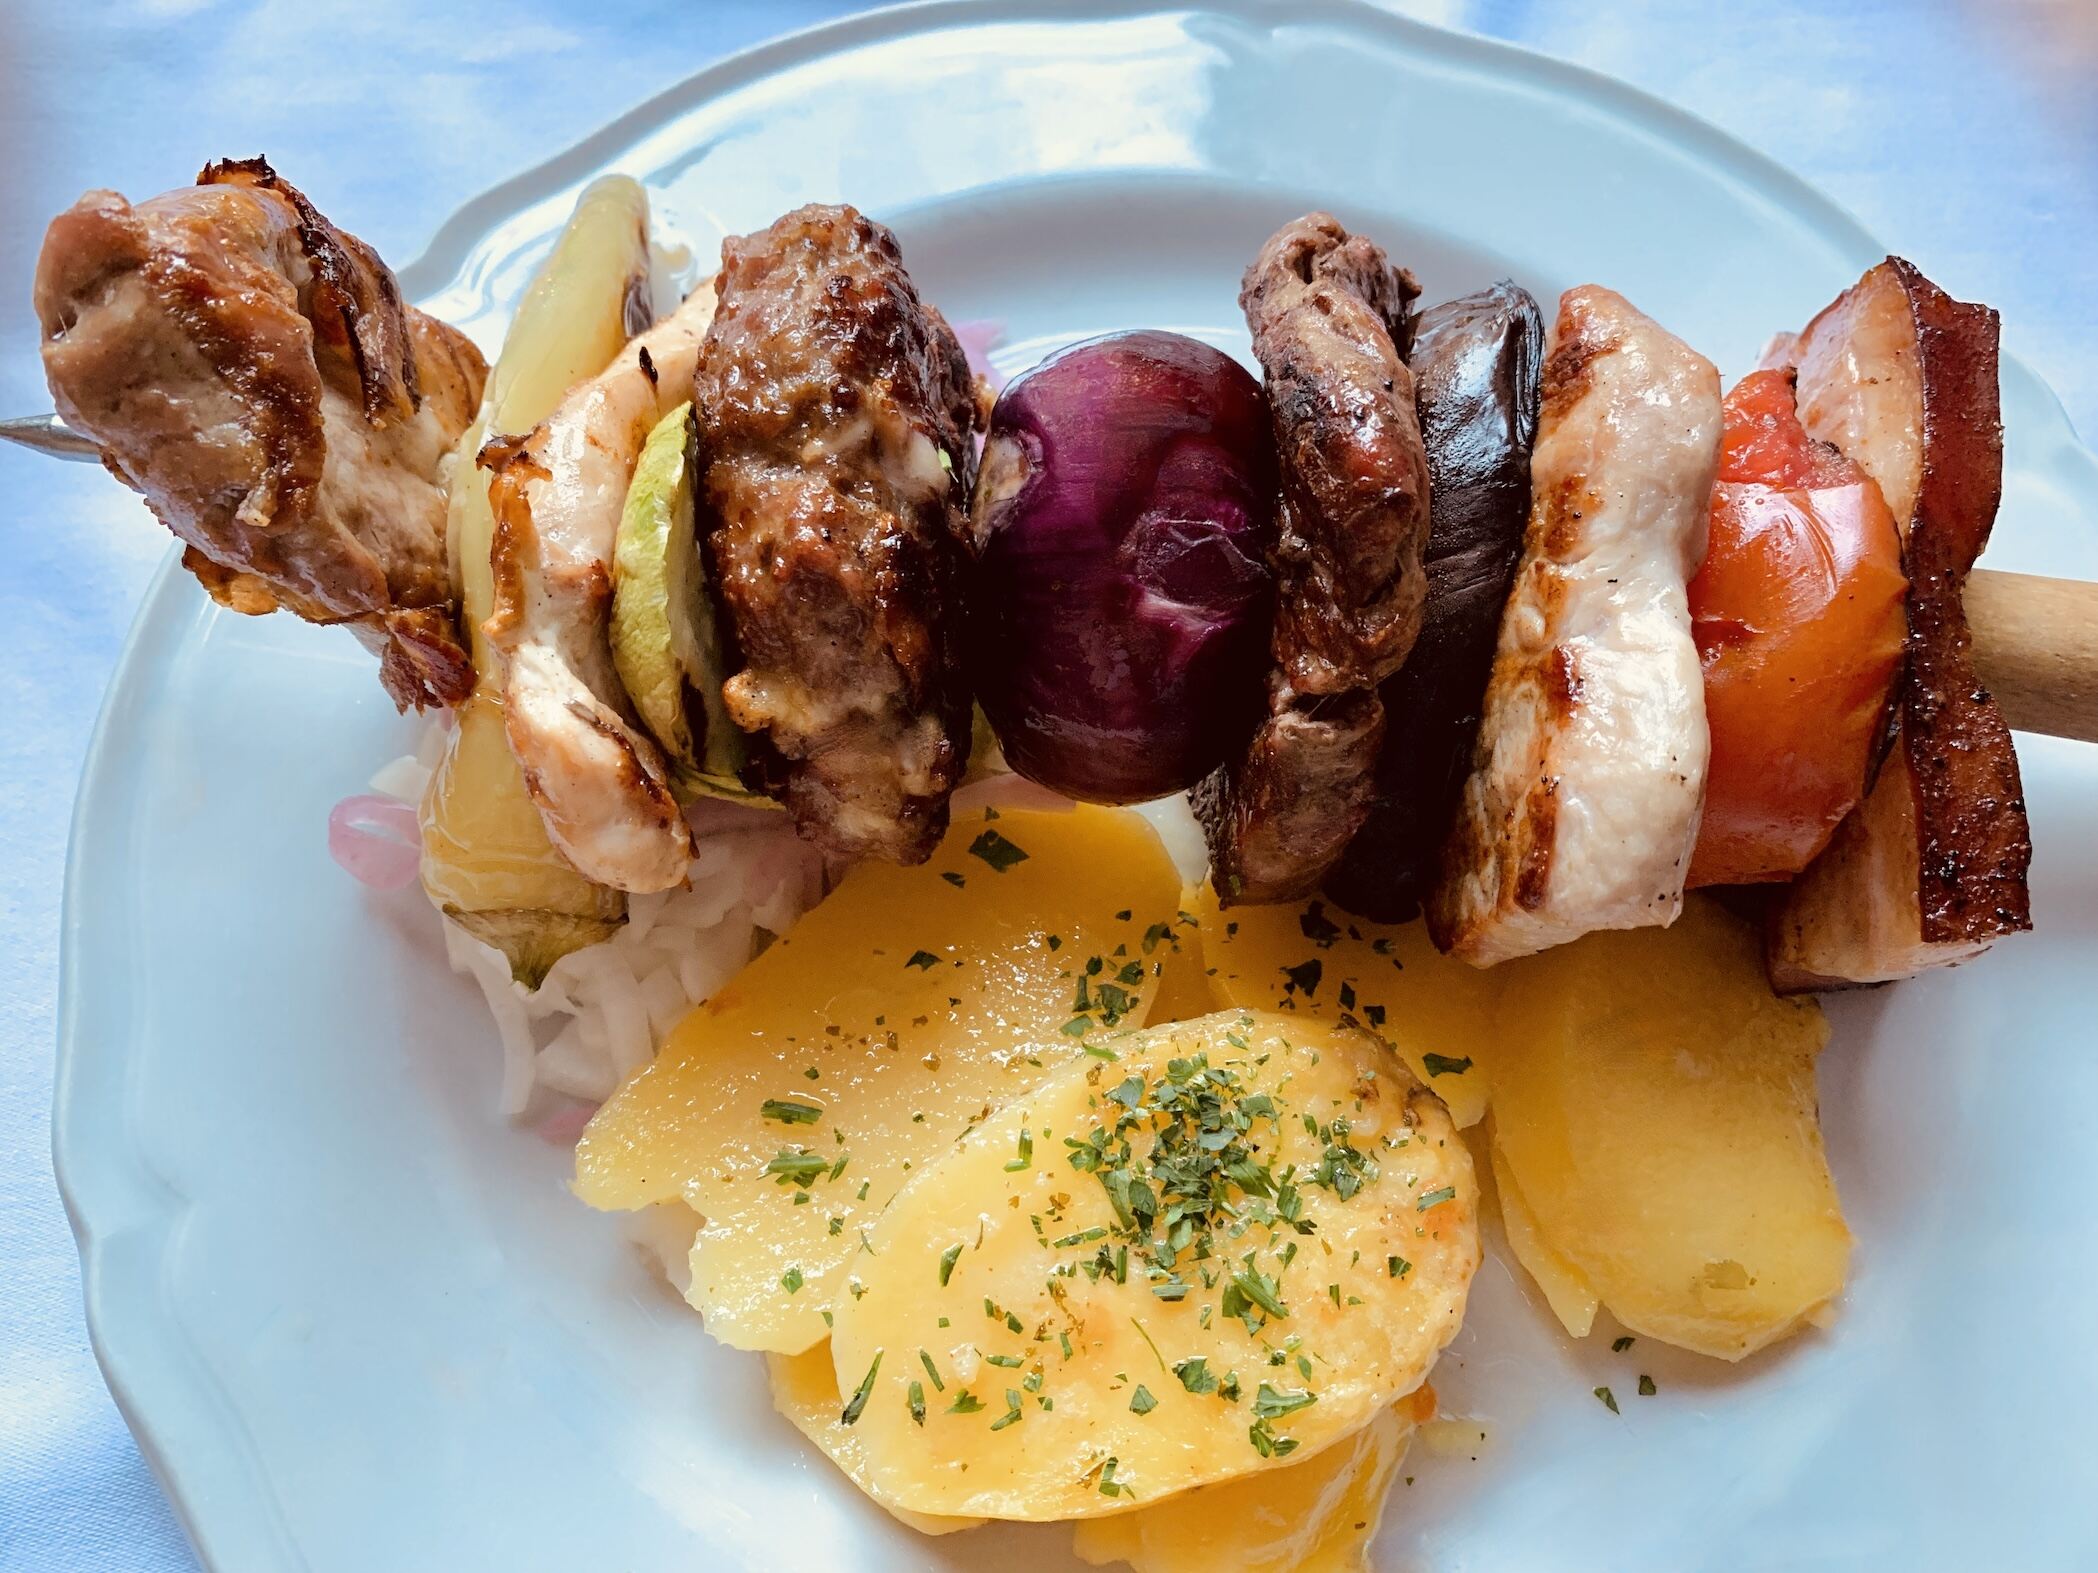 Mixed meat skewers at the Three Hats restaurant in Belgrade